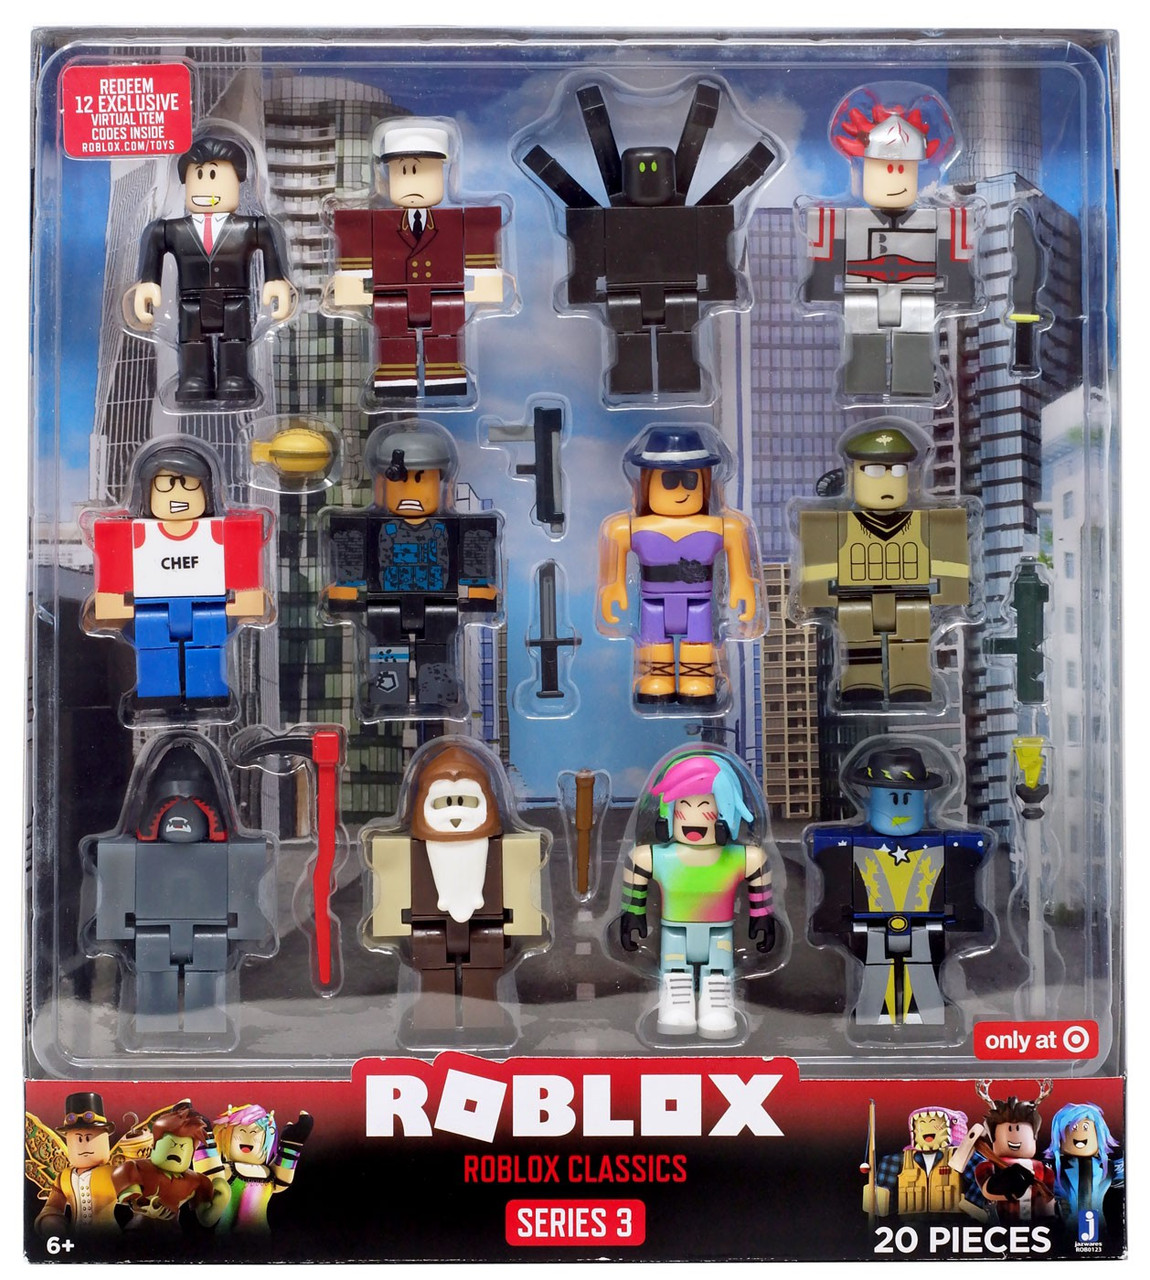 Series 3 Roblox Classics Exclusive Action Figure 12 Pack - museum roblox toy